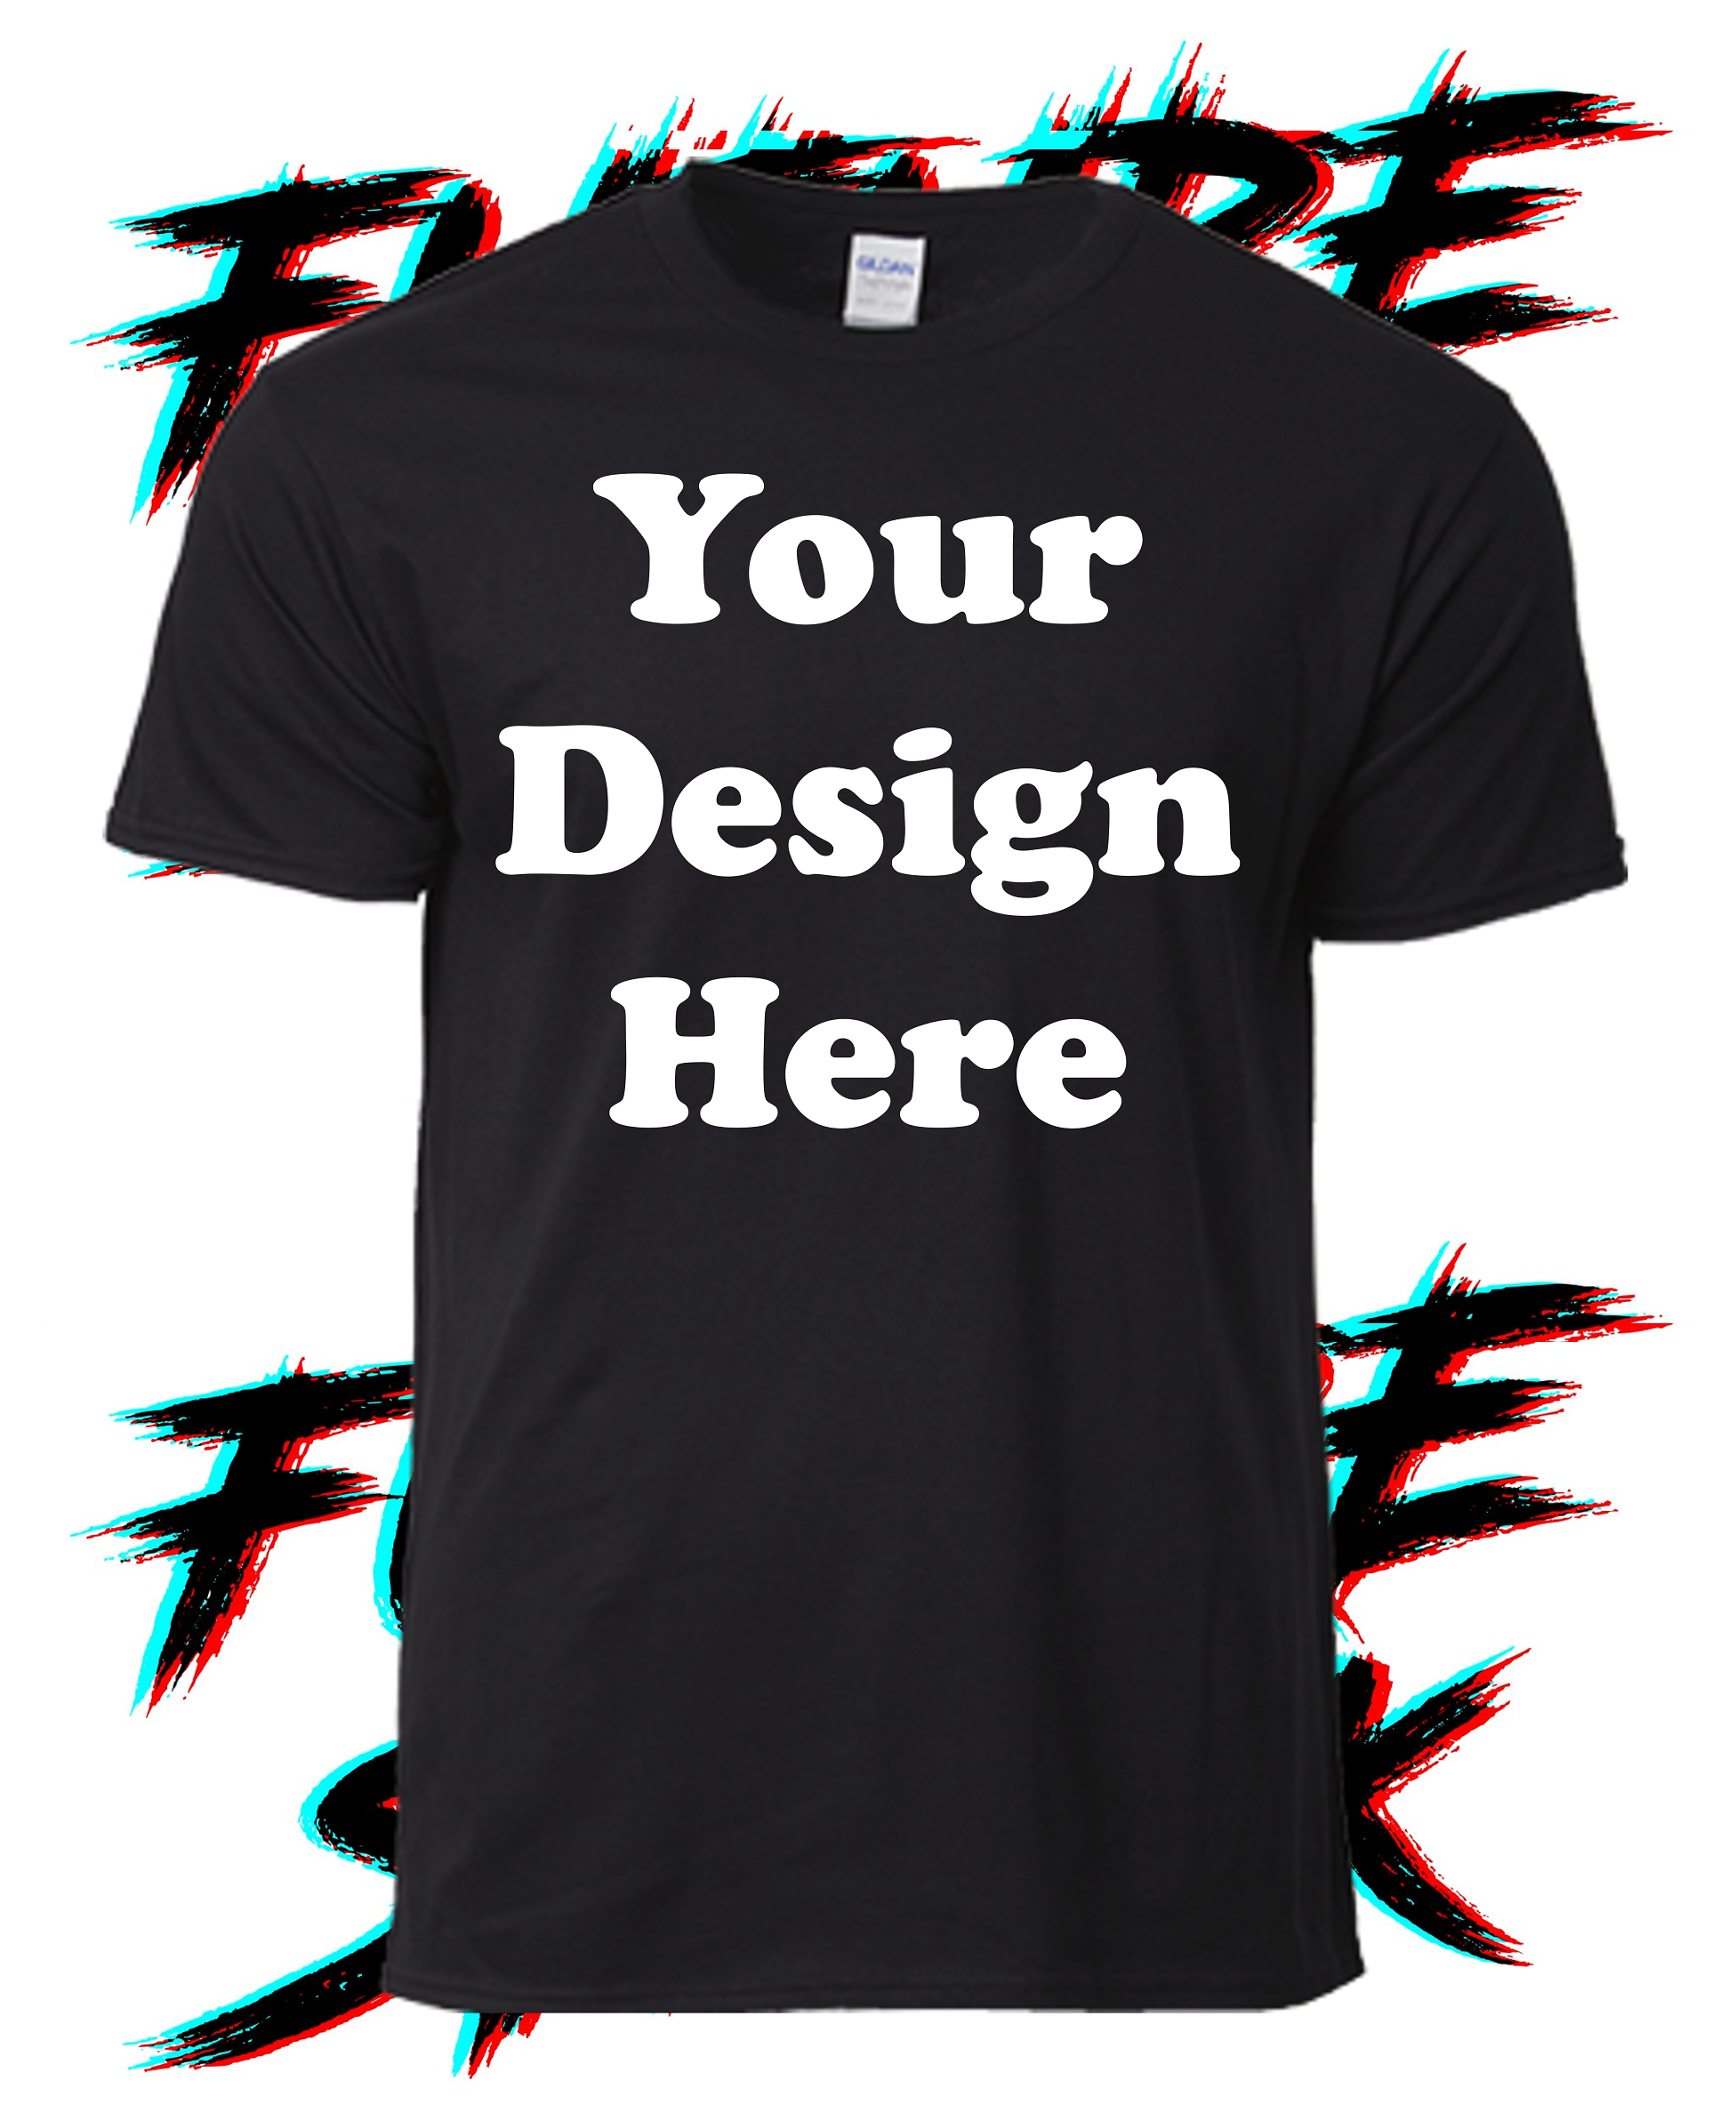 Your Design Here